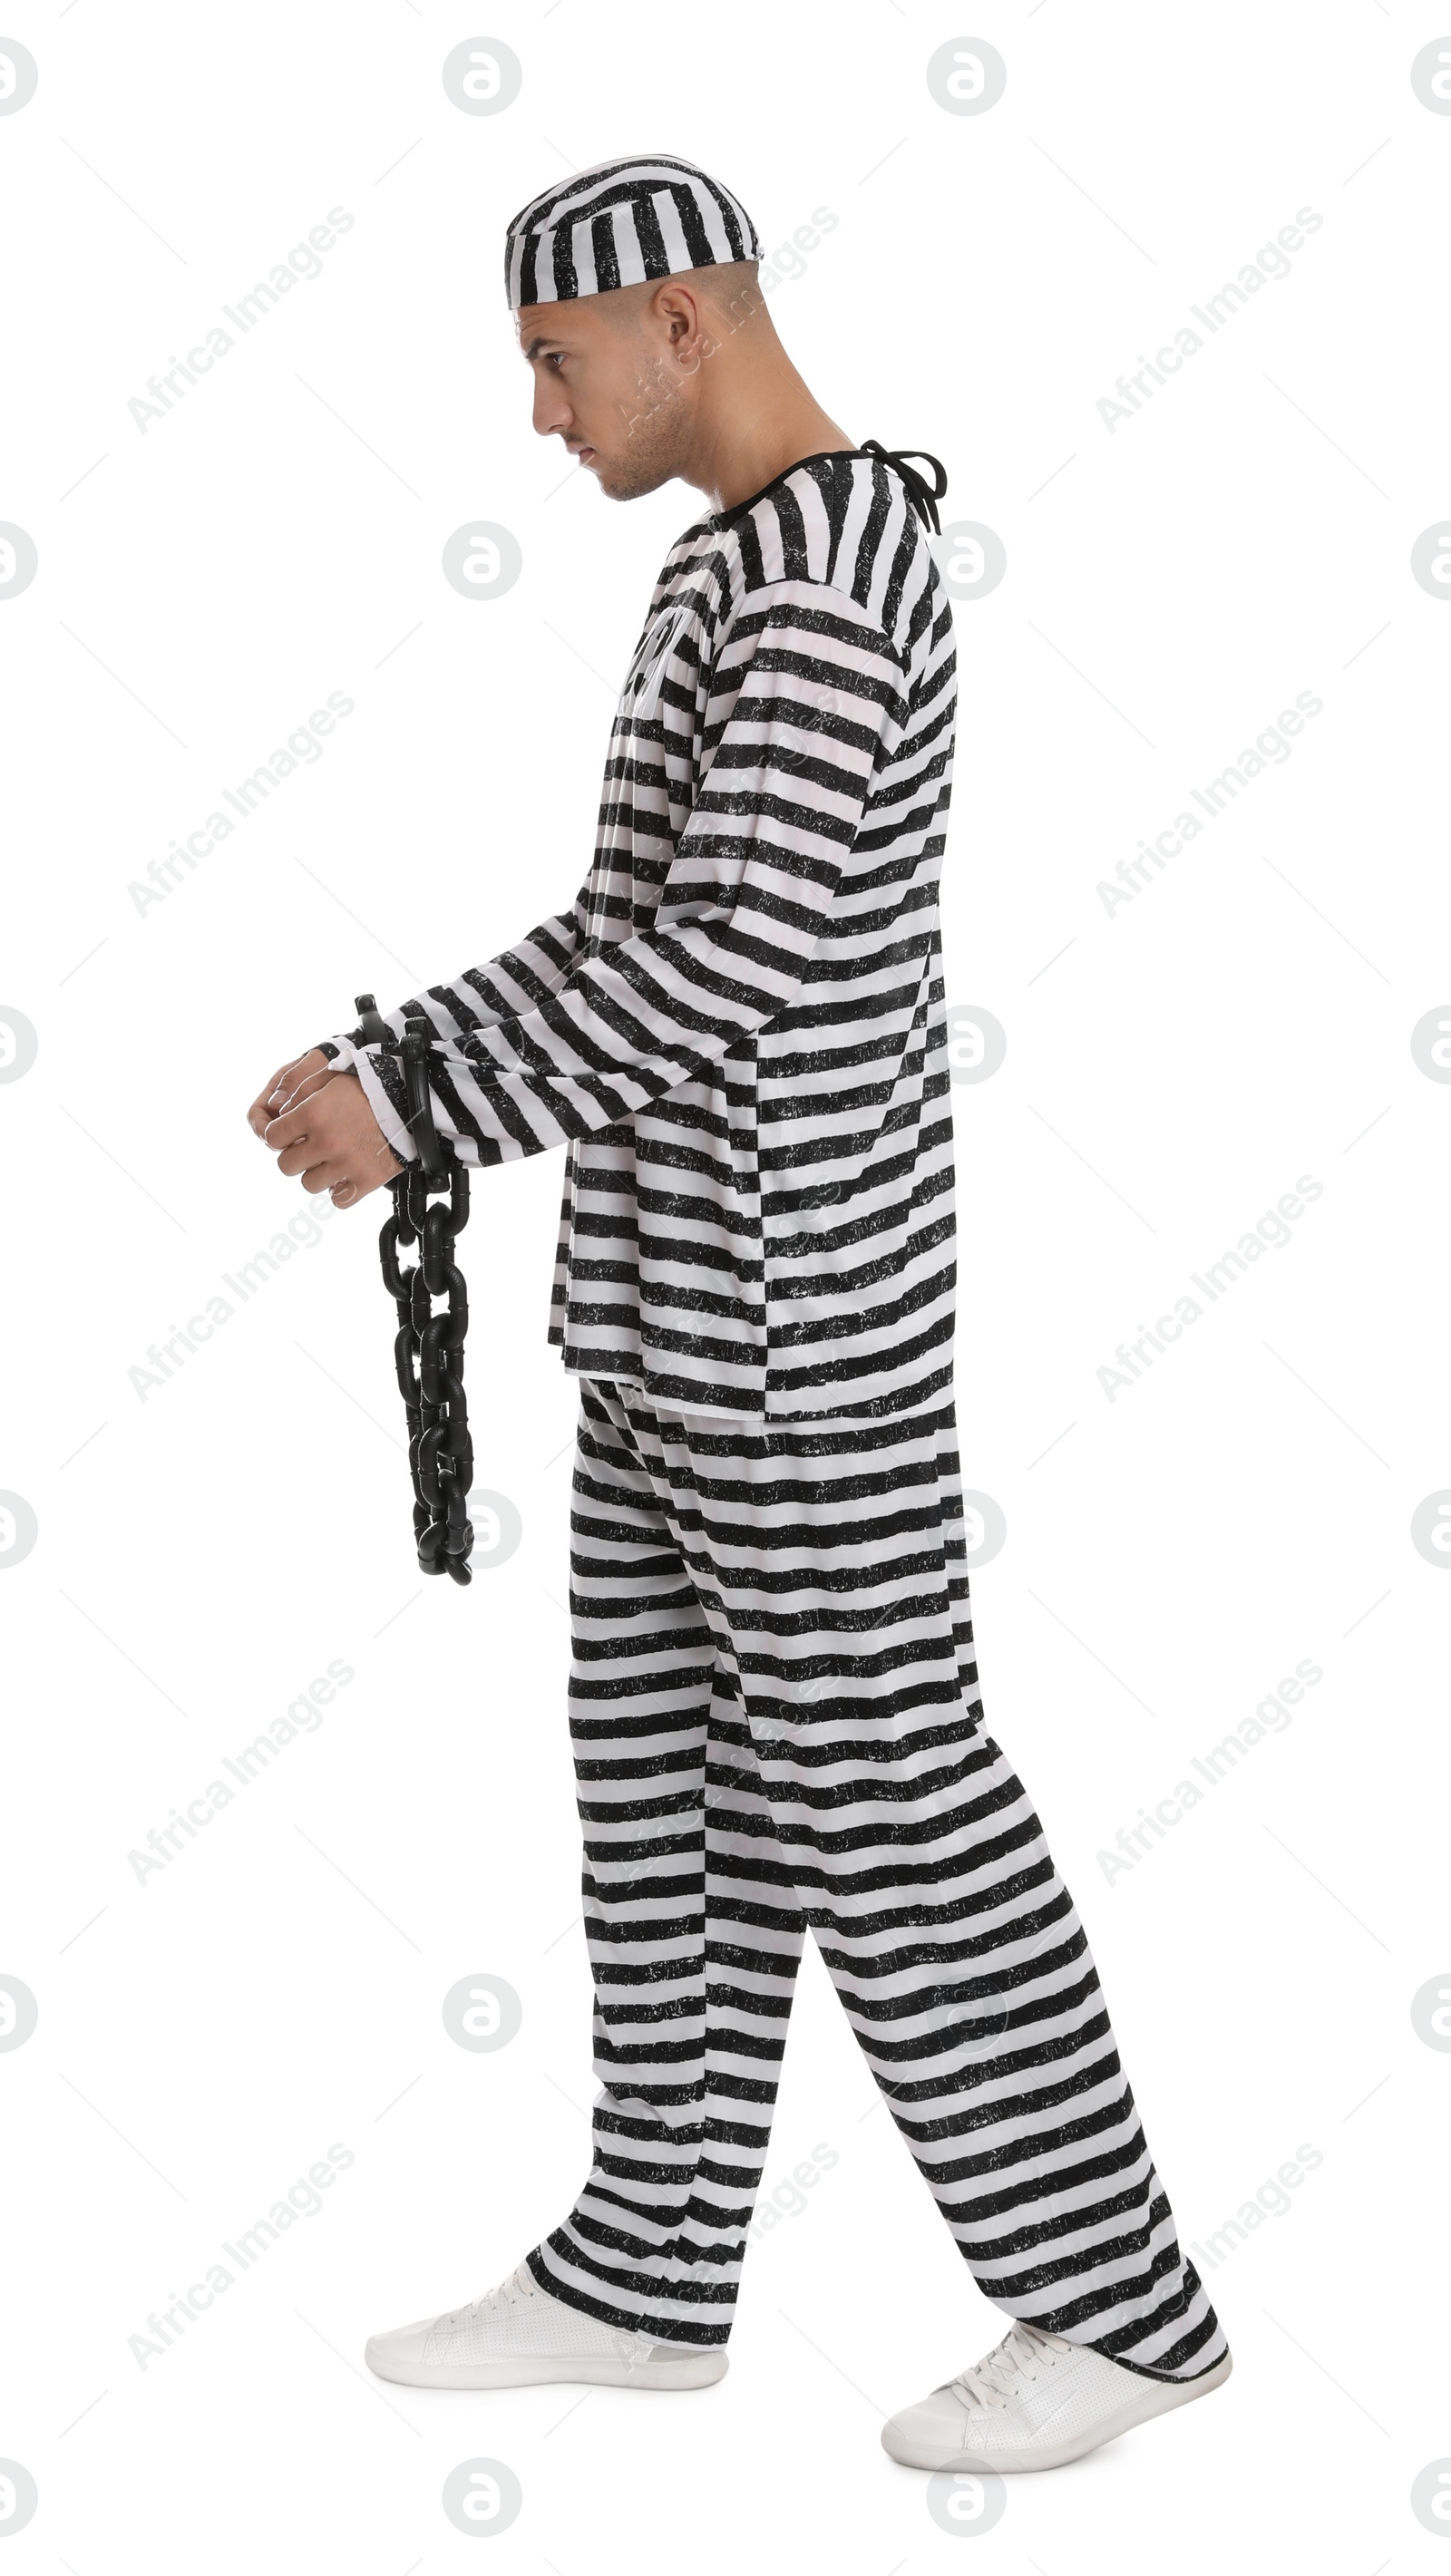 Photo of Prisoner in striped uniform with chained hands on white background